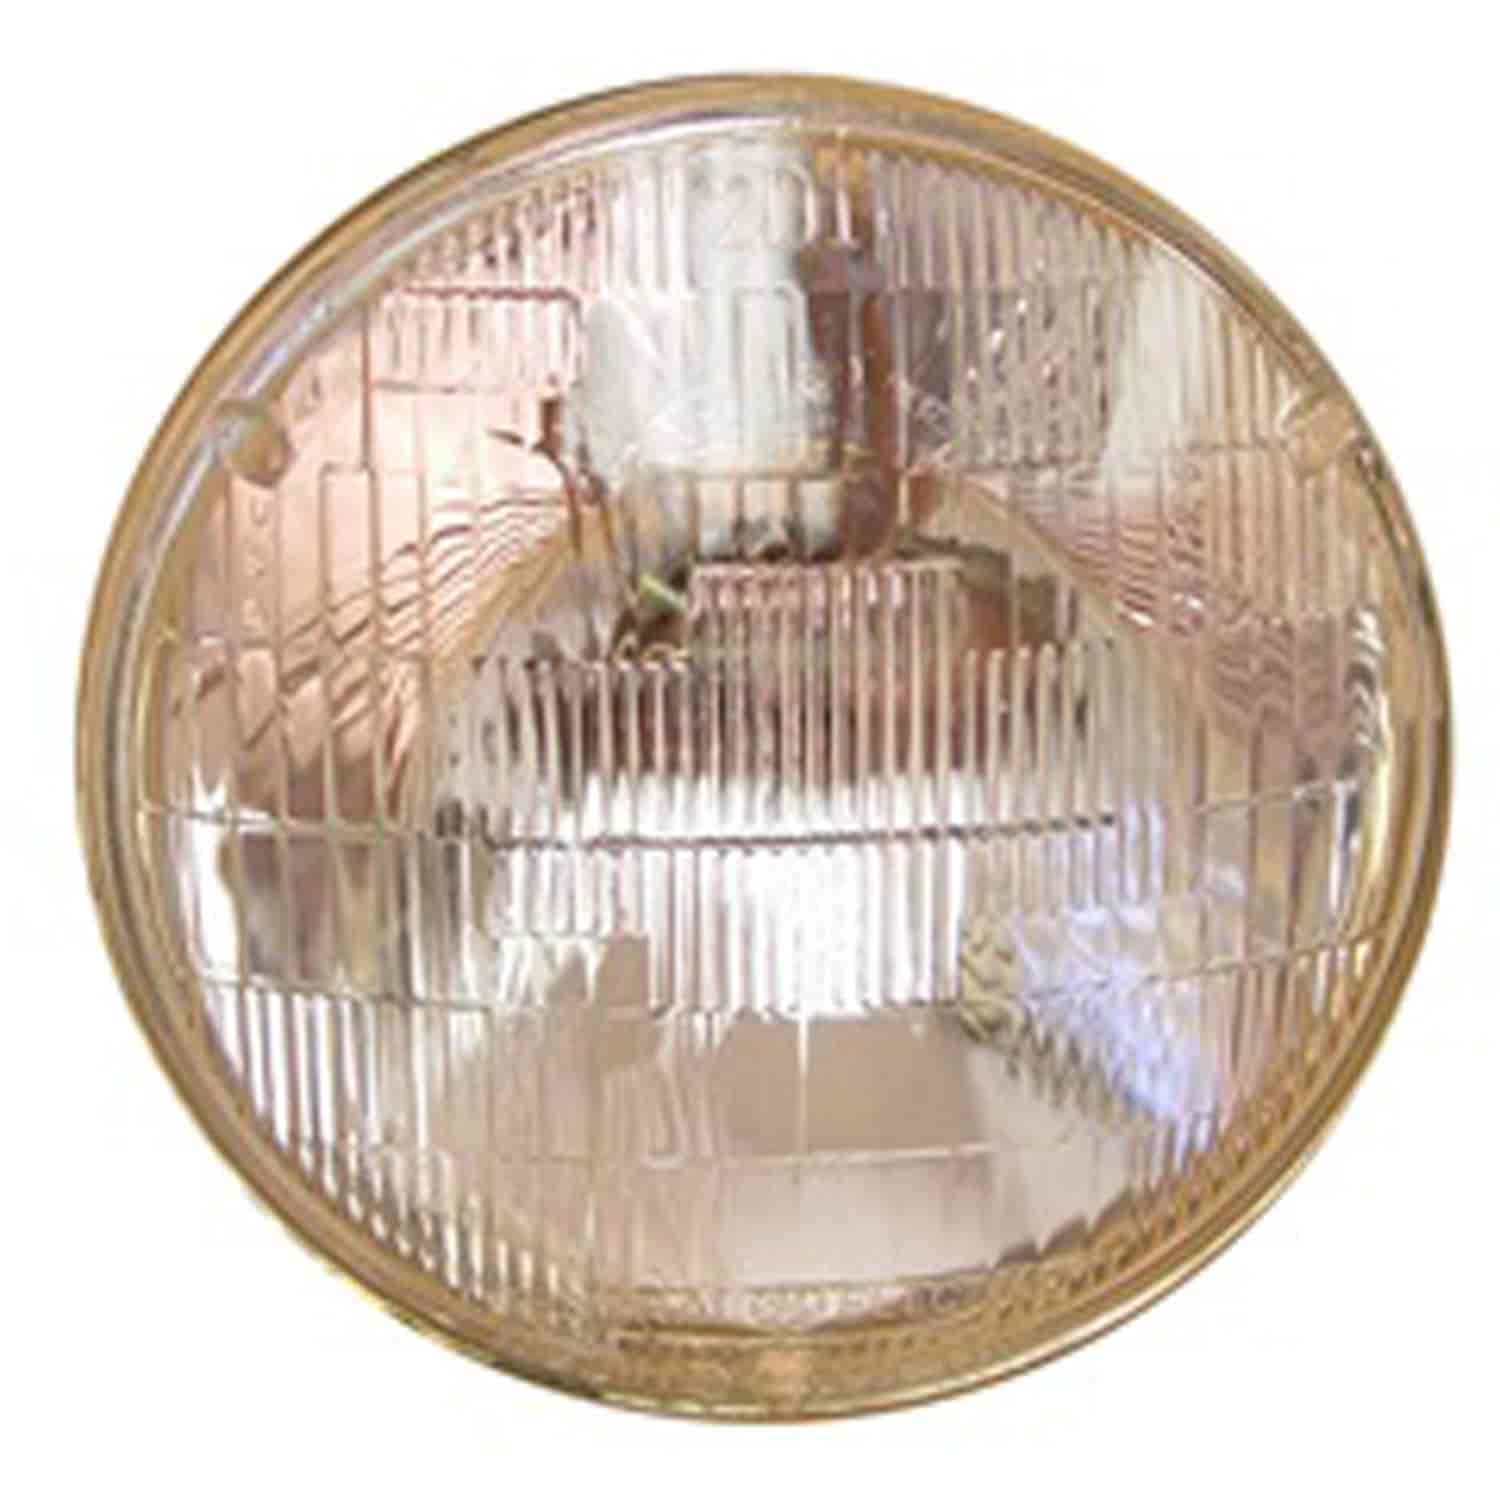 This 6-volt sealed beam 7 inch headlight from Omix-ADA fits 46-64 Willys and Jeep CJ models.